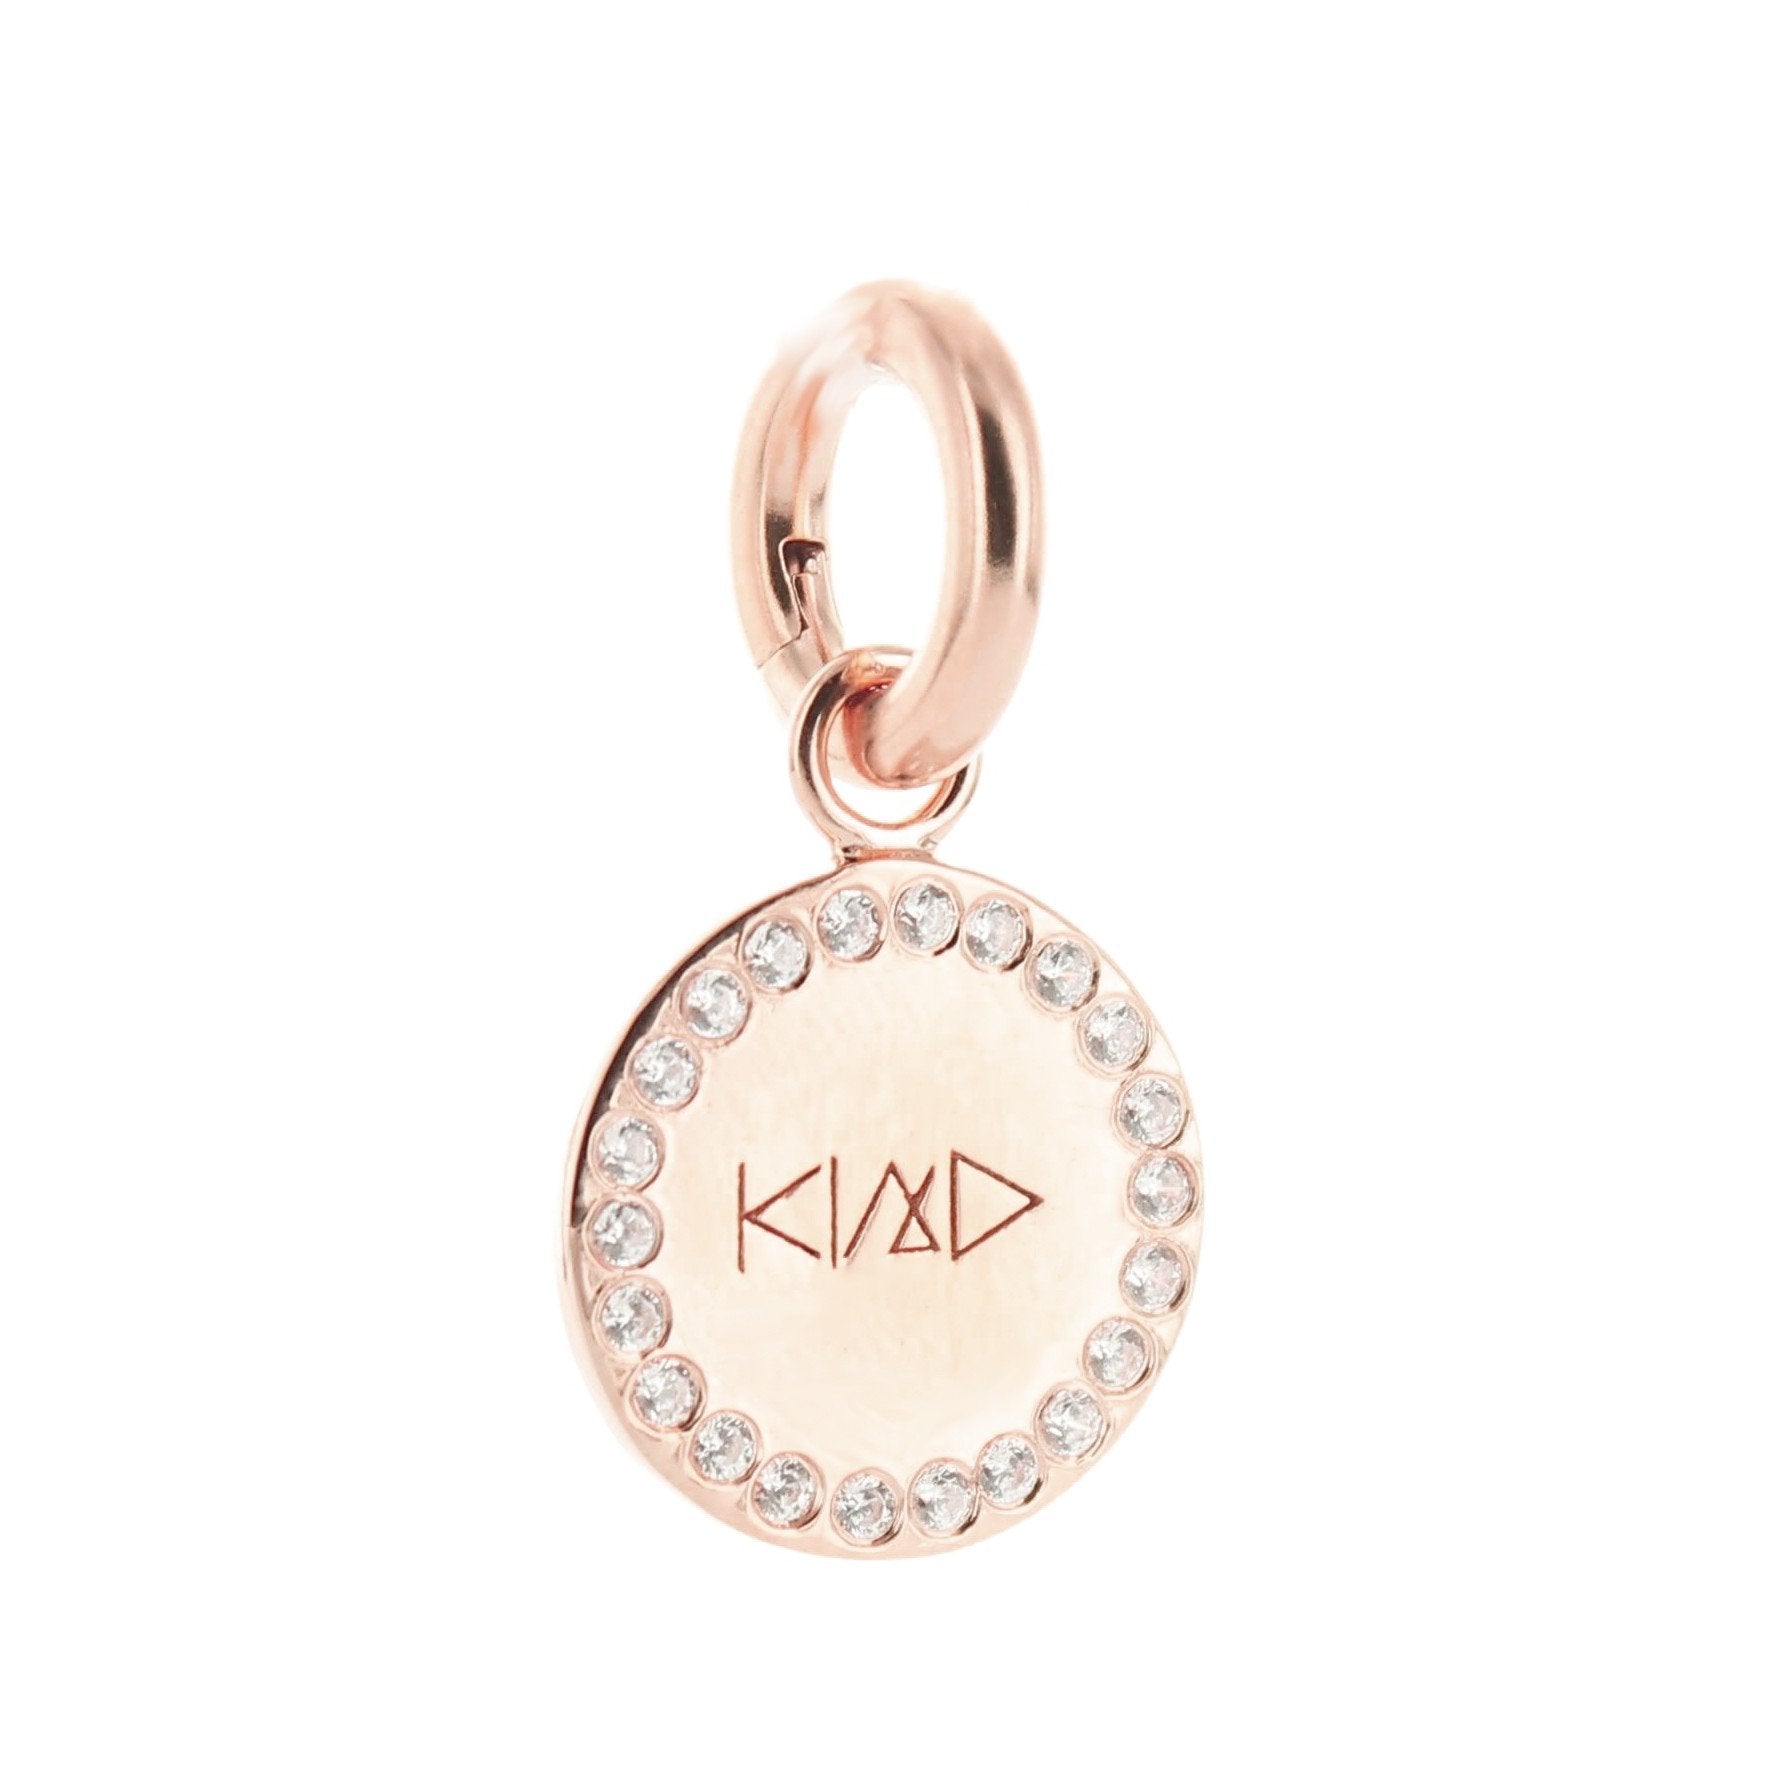 KIND FLOATING CHARM PENDANT CUBIC ZIRCONIA ROSE GOLD - SO PRETTY CARA COTTER